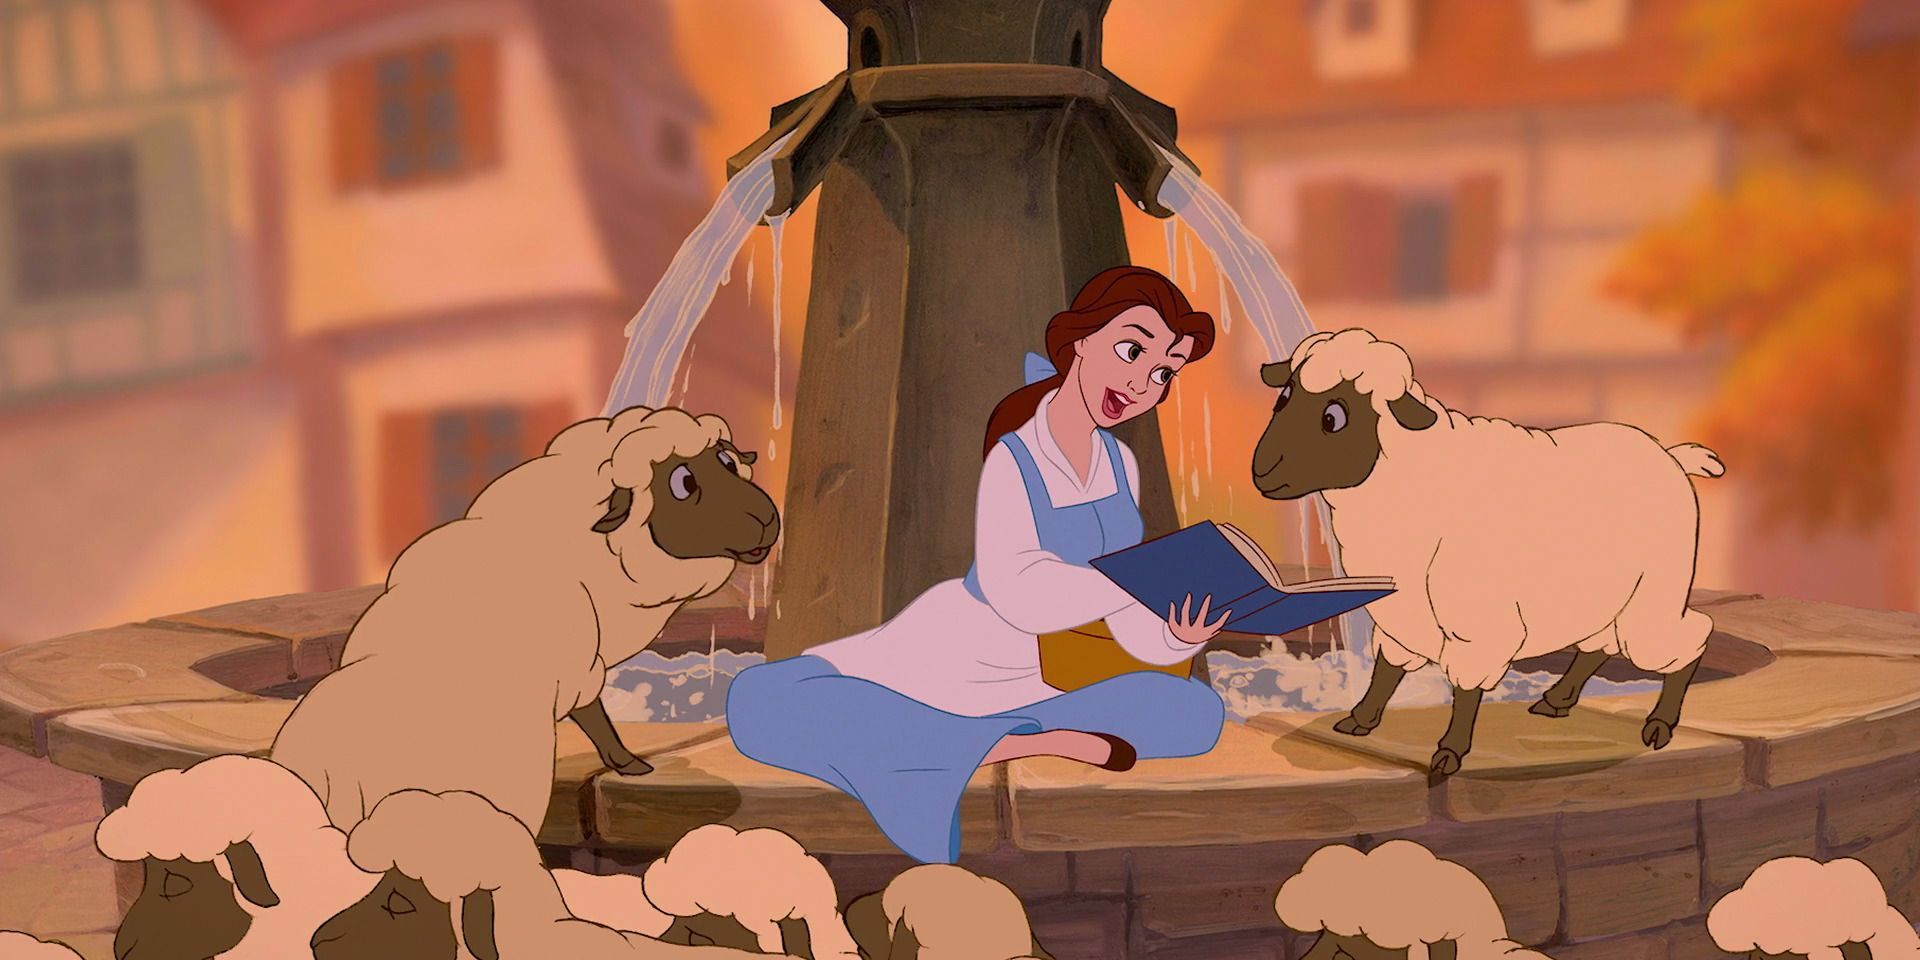 Belle reading and singing in Beauty and the beast (1991) reading a book to sheep (animation)